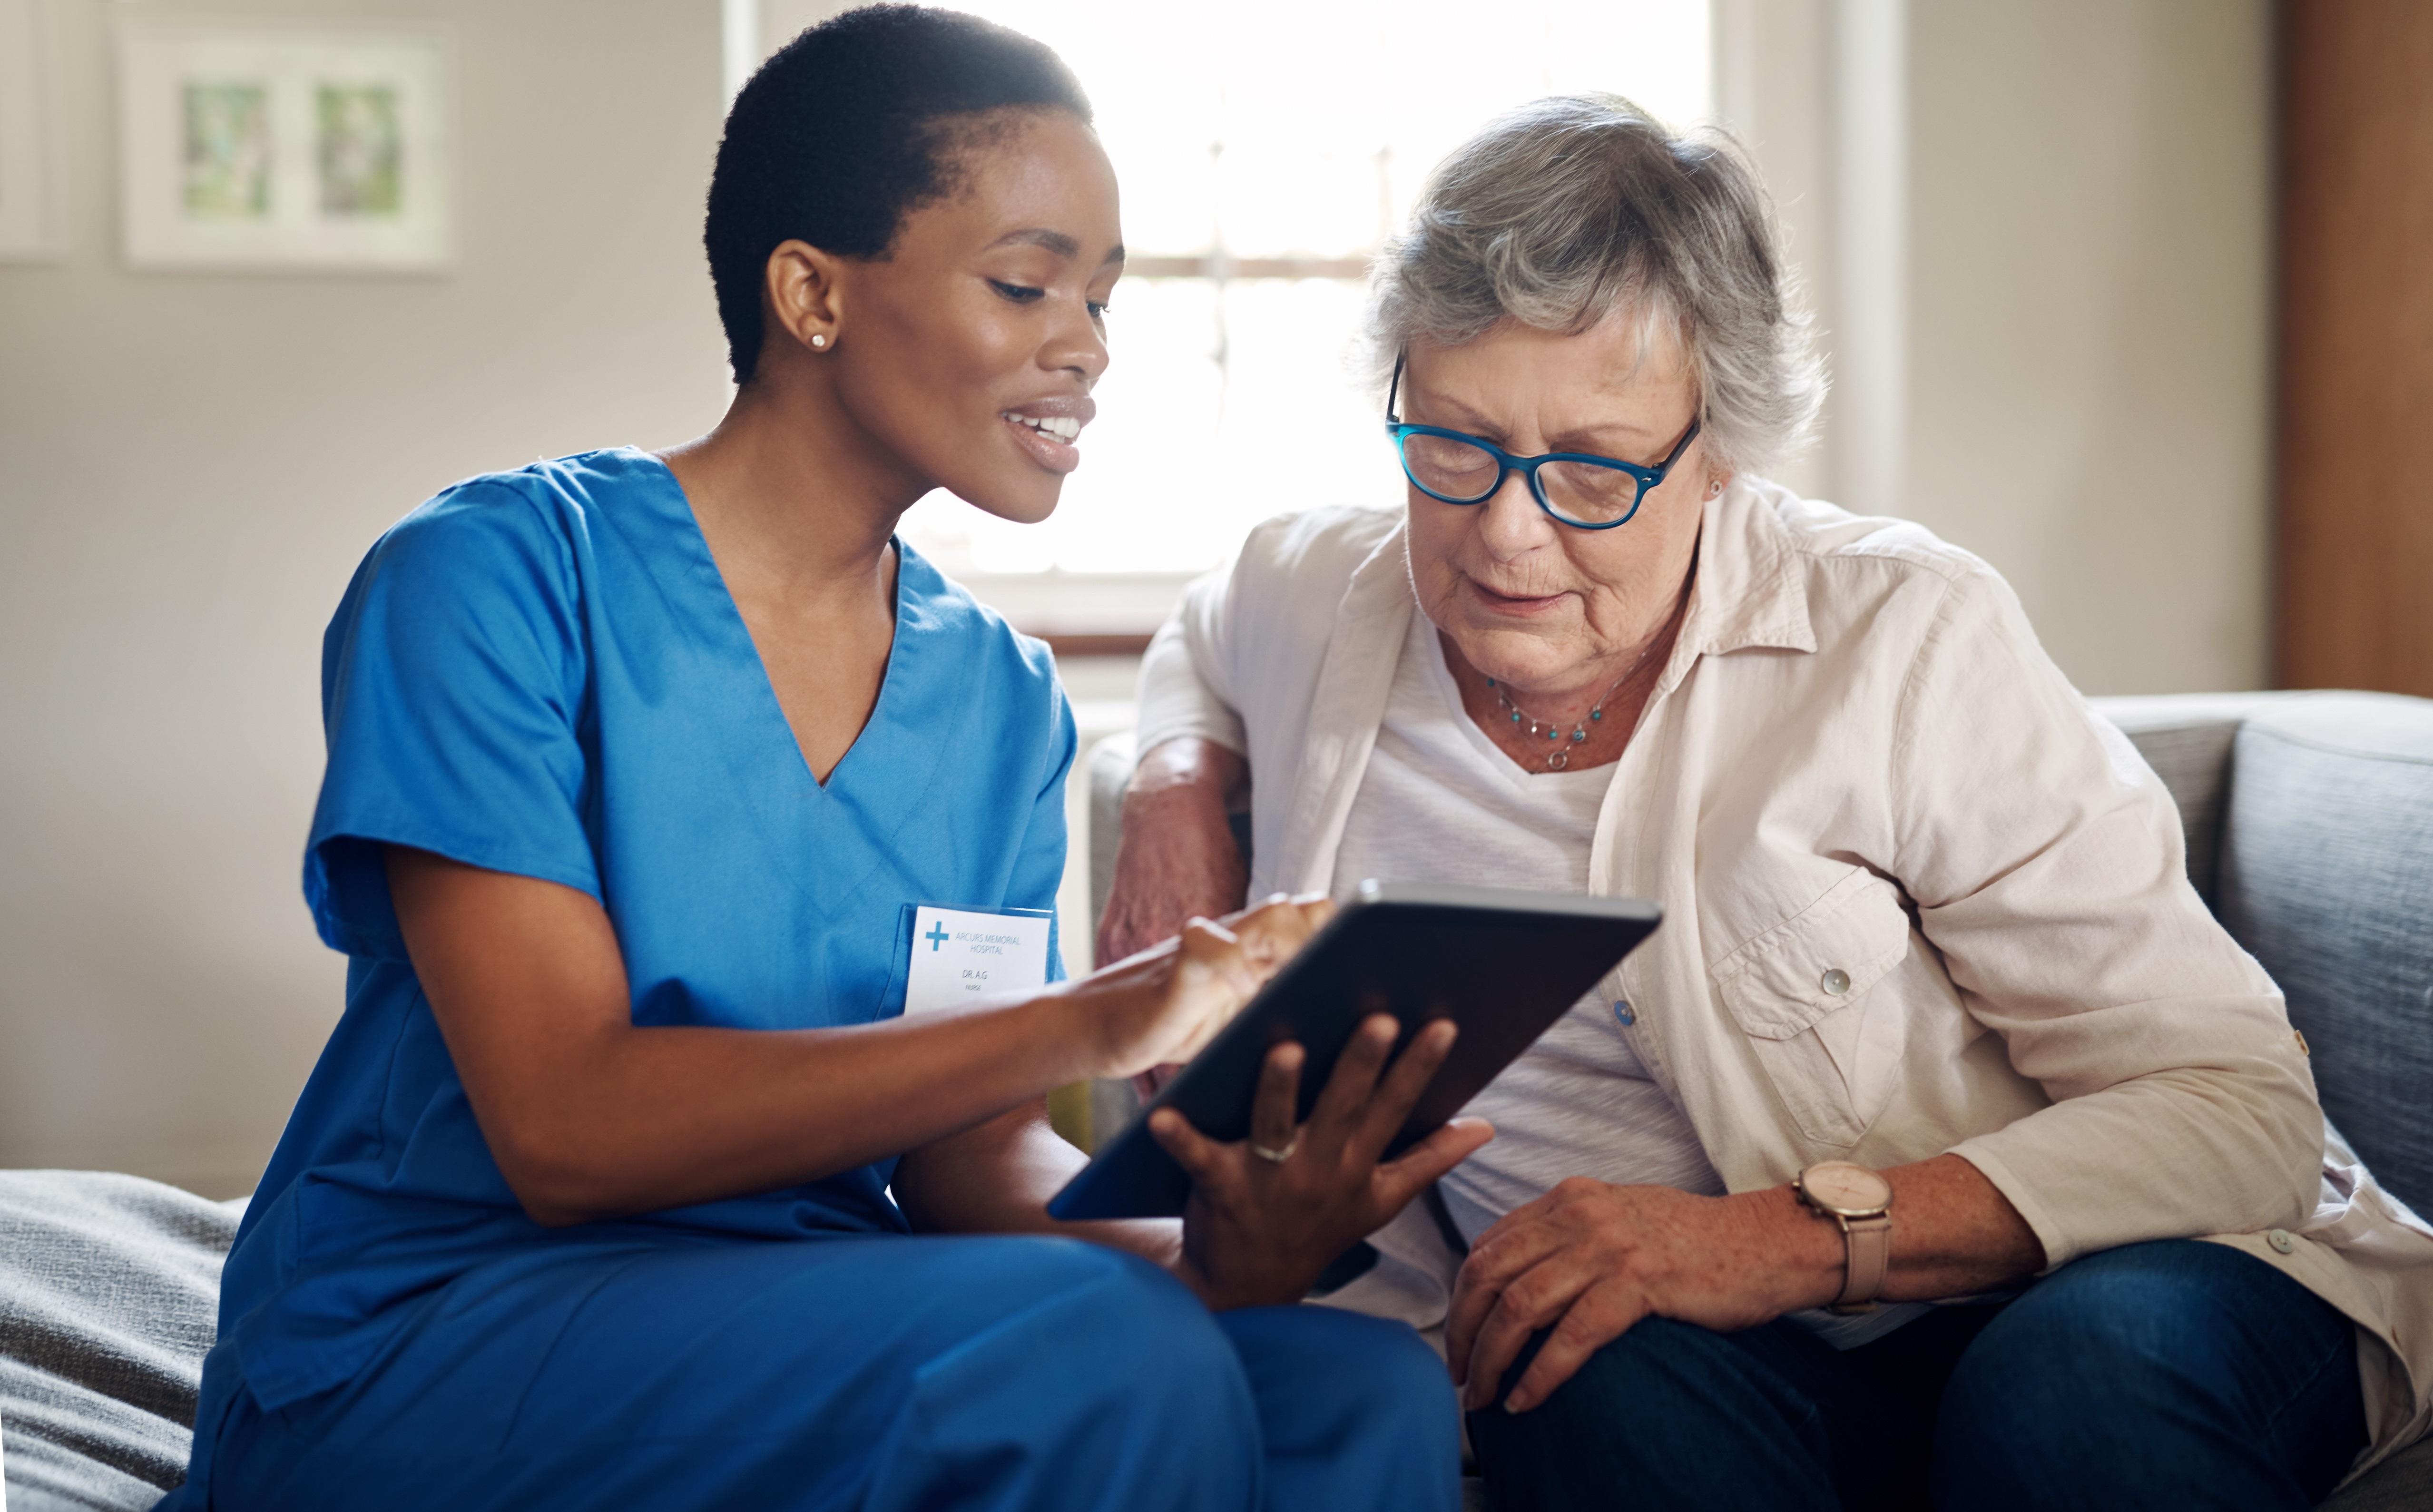 care provider reviews ipad with patient at home